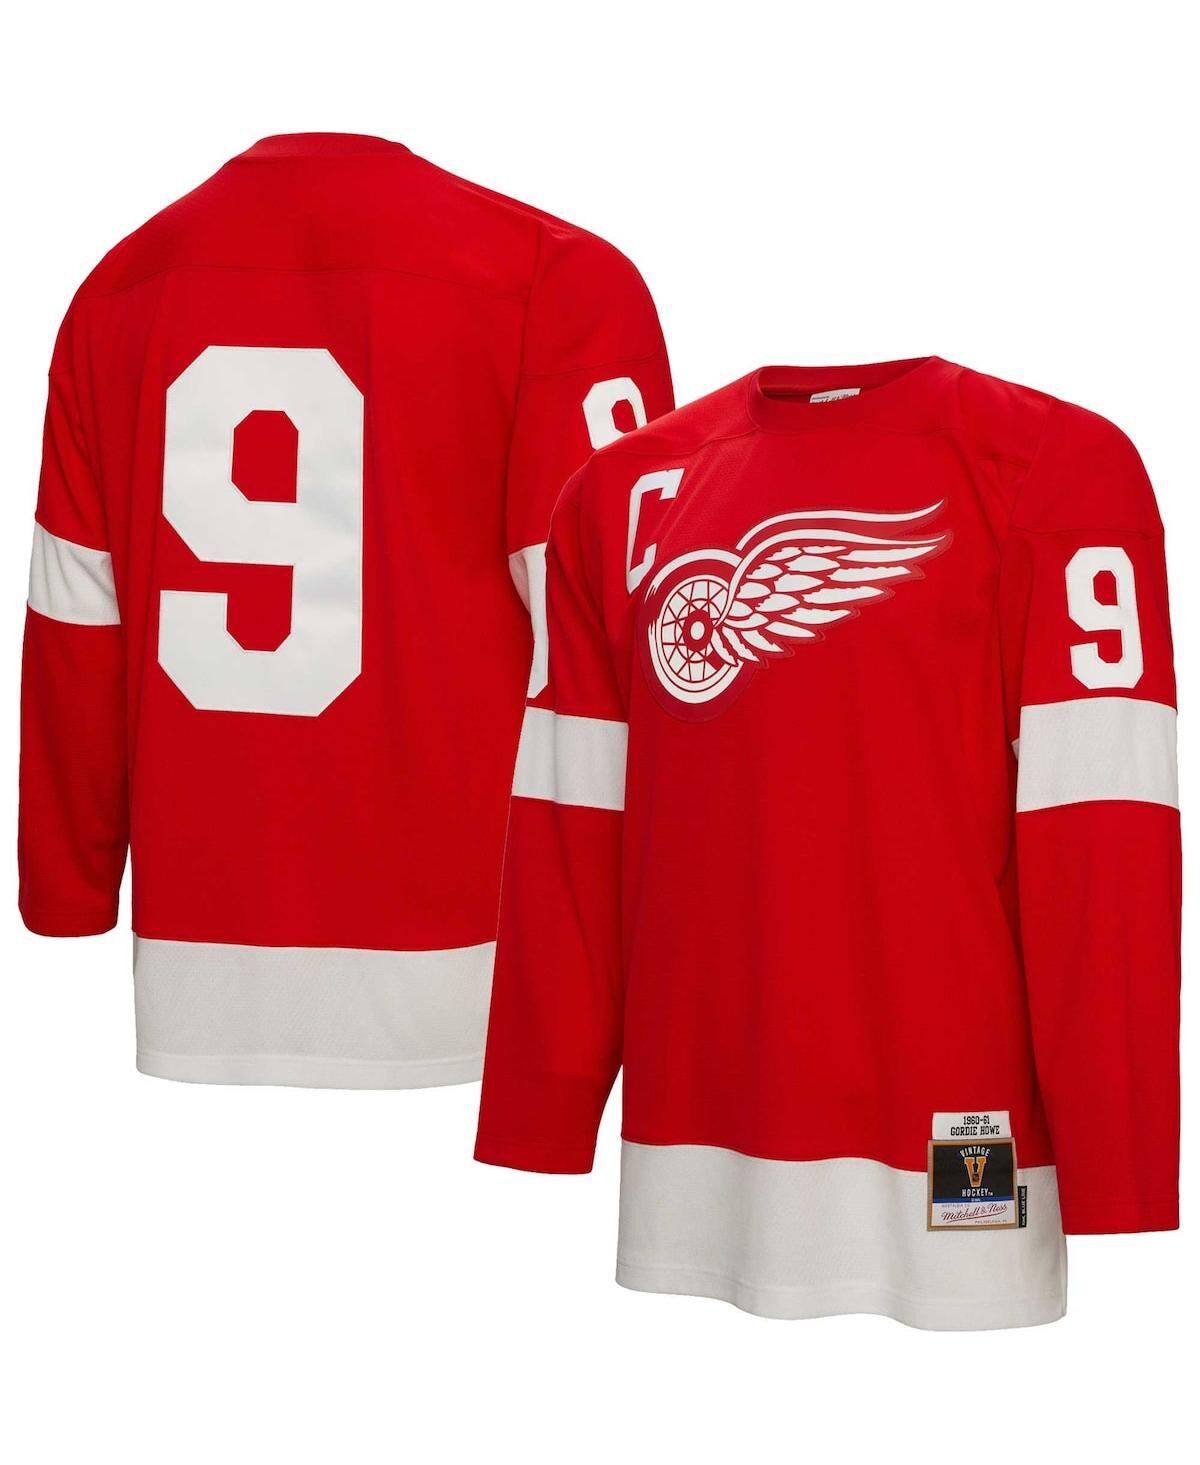 Mitchell & Ness Men's Mitchell & Ness Gordie Howe Red Detroit Red Wings 1960 Blue Line Player Jersey - Red